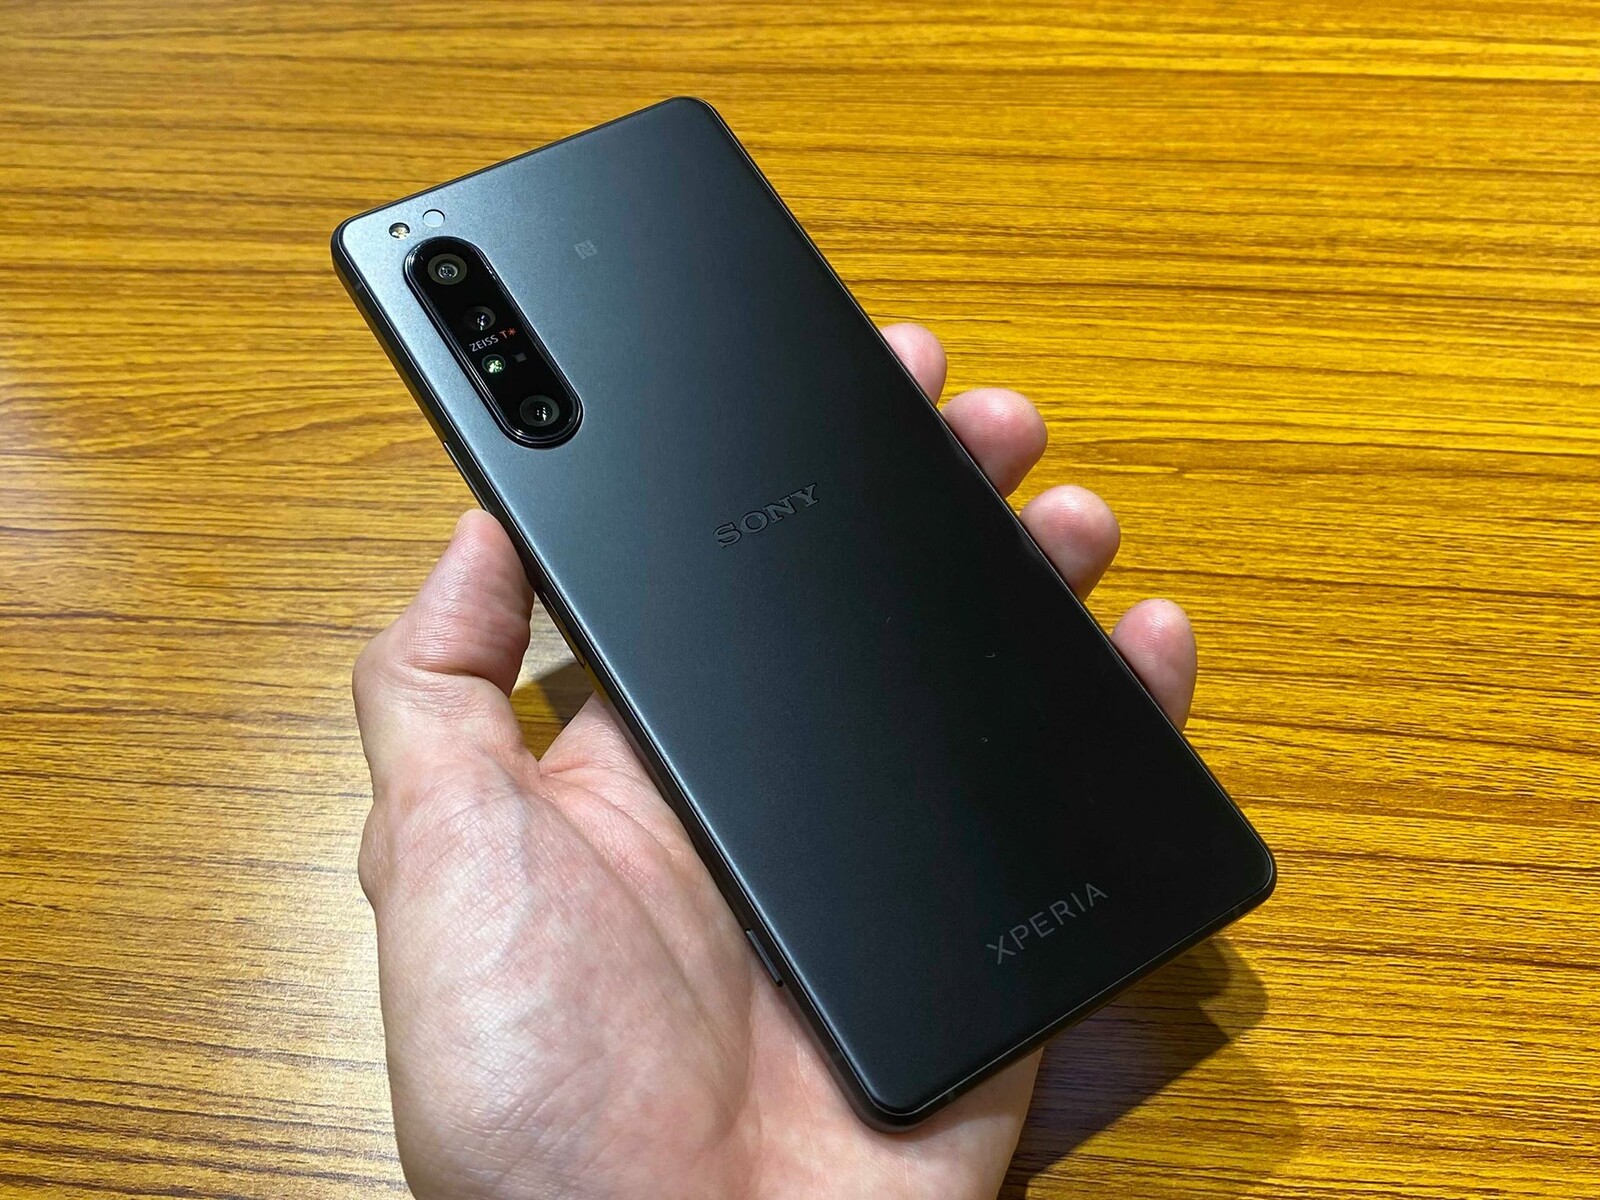 The Sony Xperia 1 Ii Shows The Performance Limits Of Having 12 Gb Of Ram Over 8 Gb Notebookcheck Net News